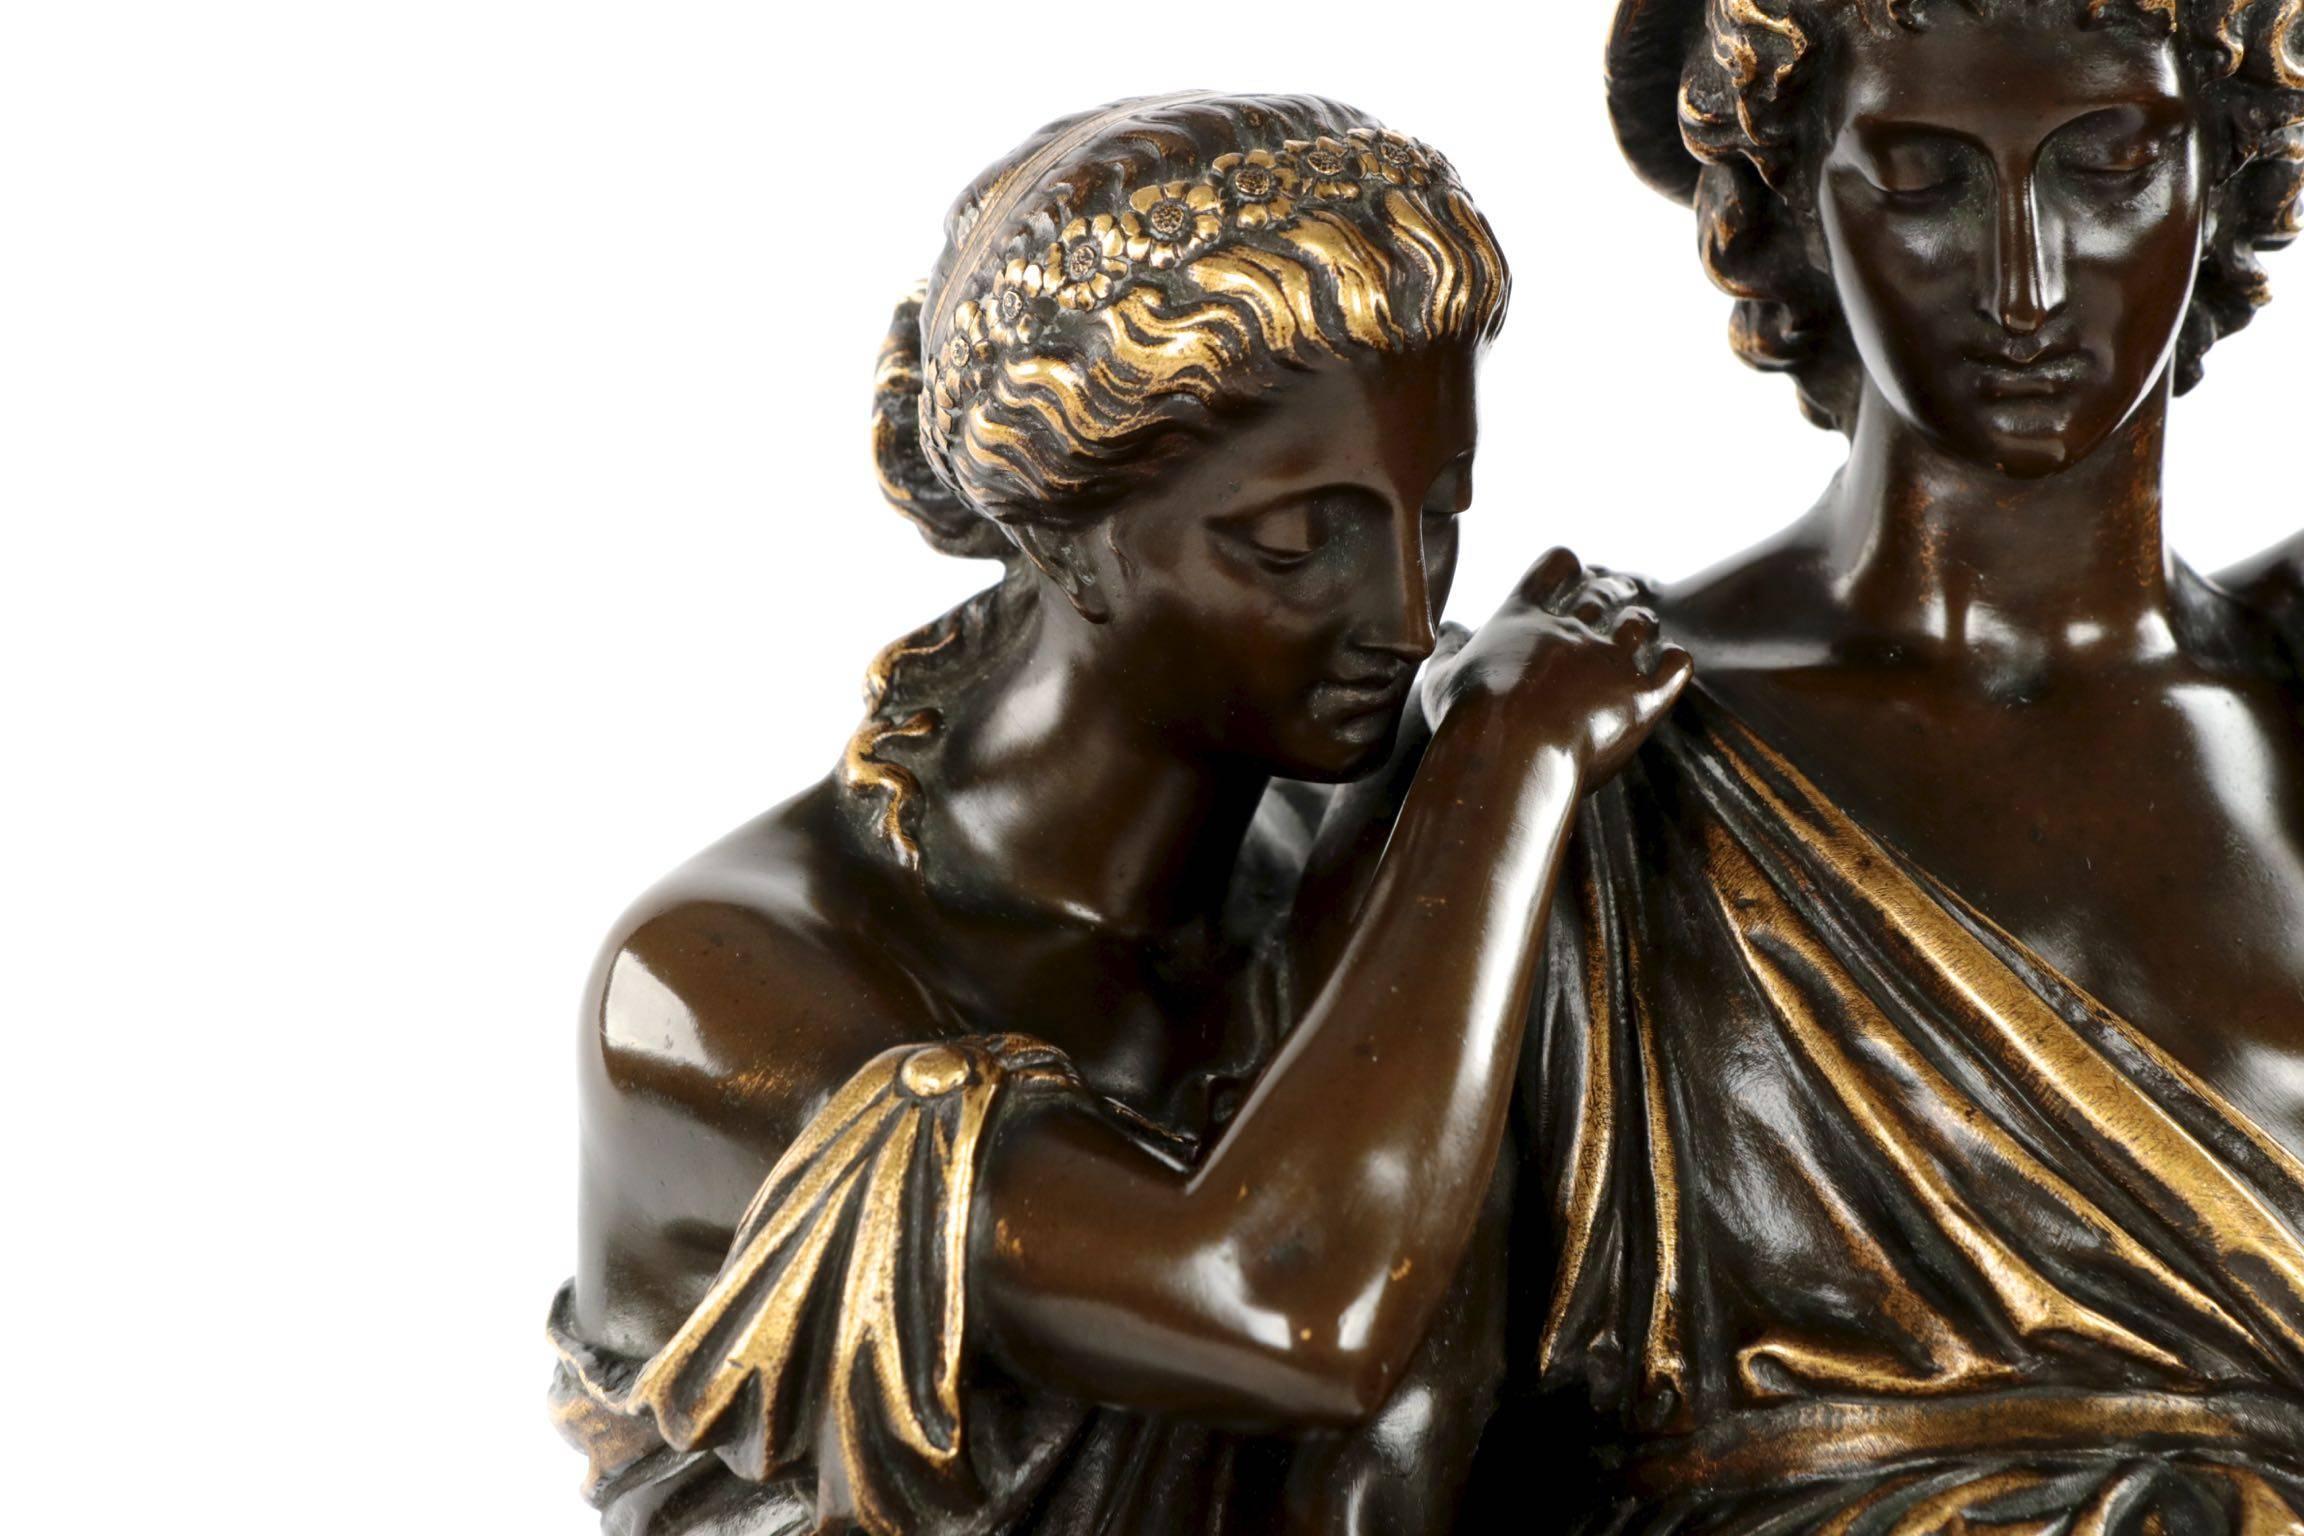 This exquisitely cast bronze group is noteworthy for it’s use of gilt highlights against the dark brown patina, a most effective method of emphasizing the lines and form of each element in the work. It is known as Bergers d’Arcadie, the Shepherds of